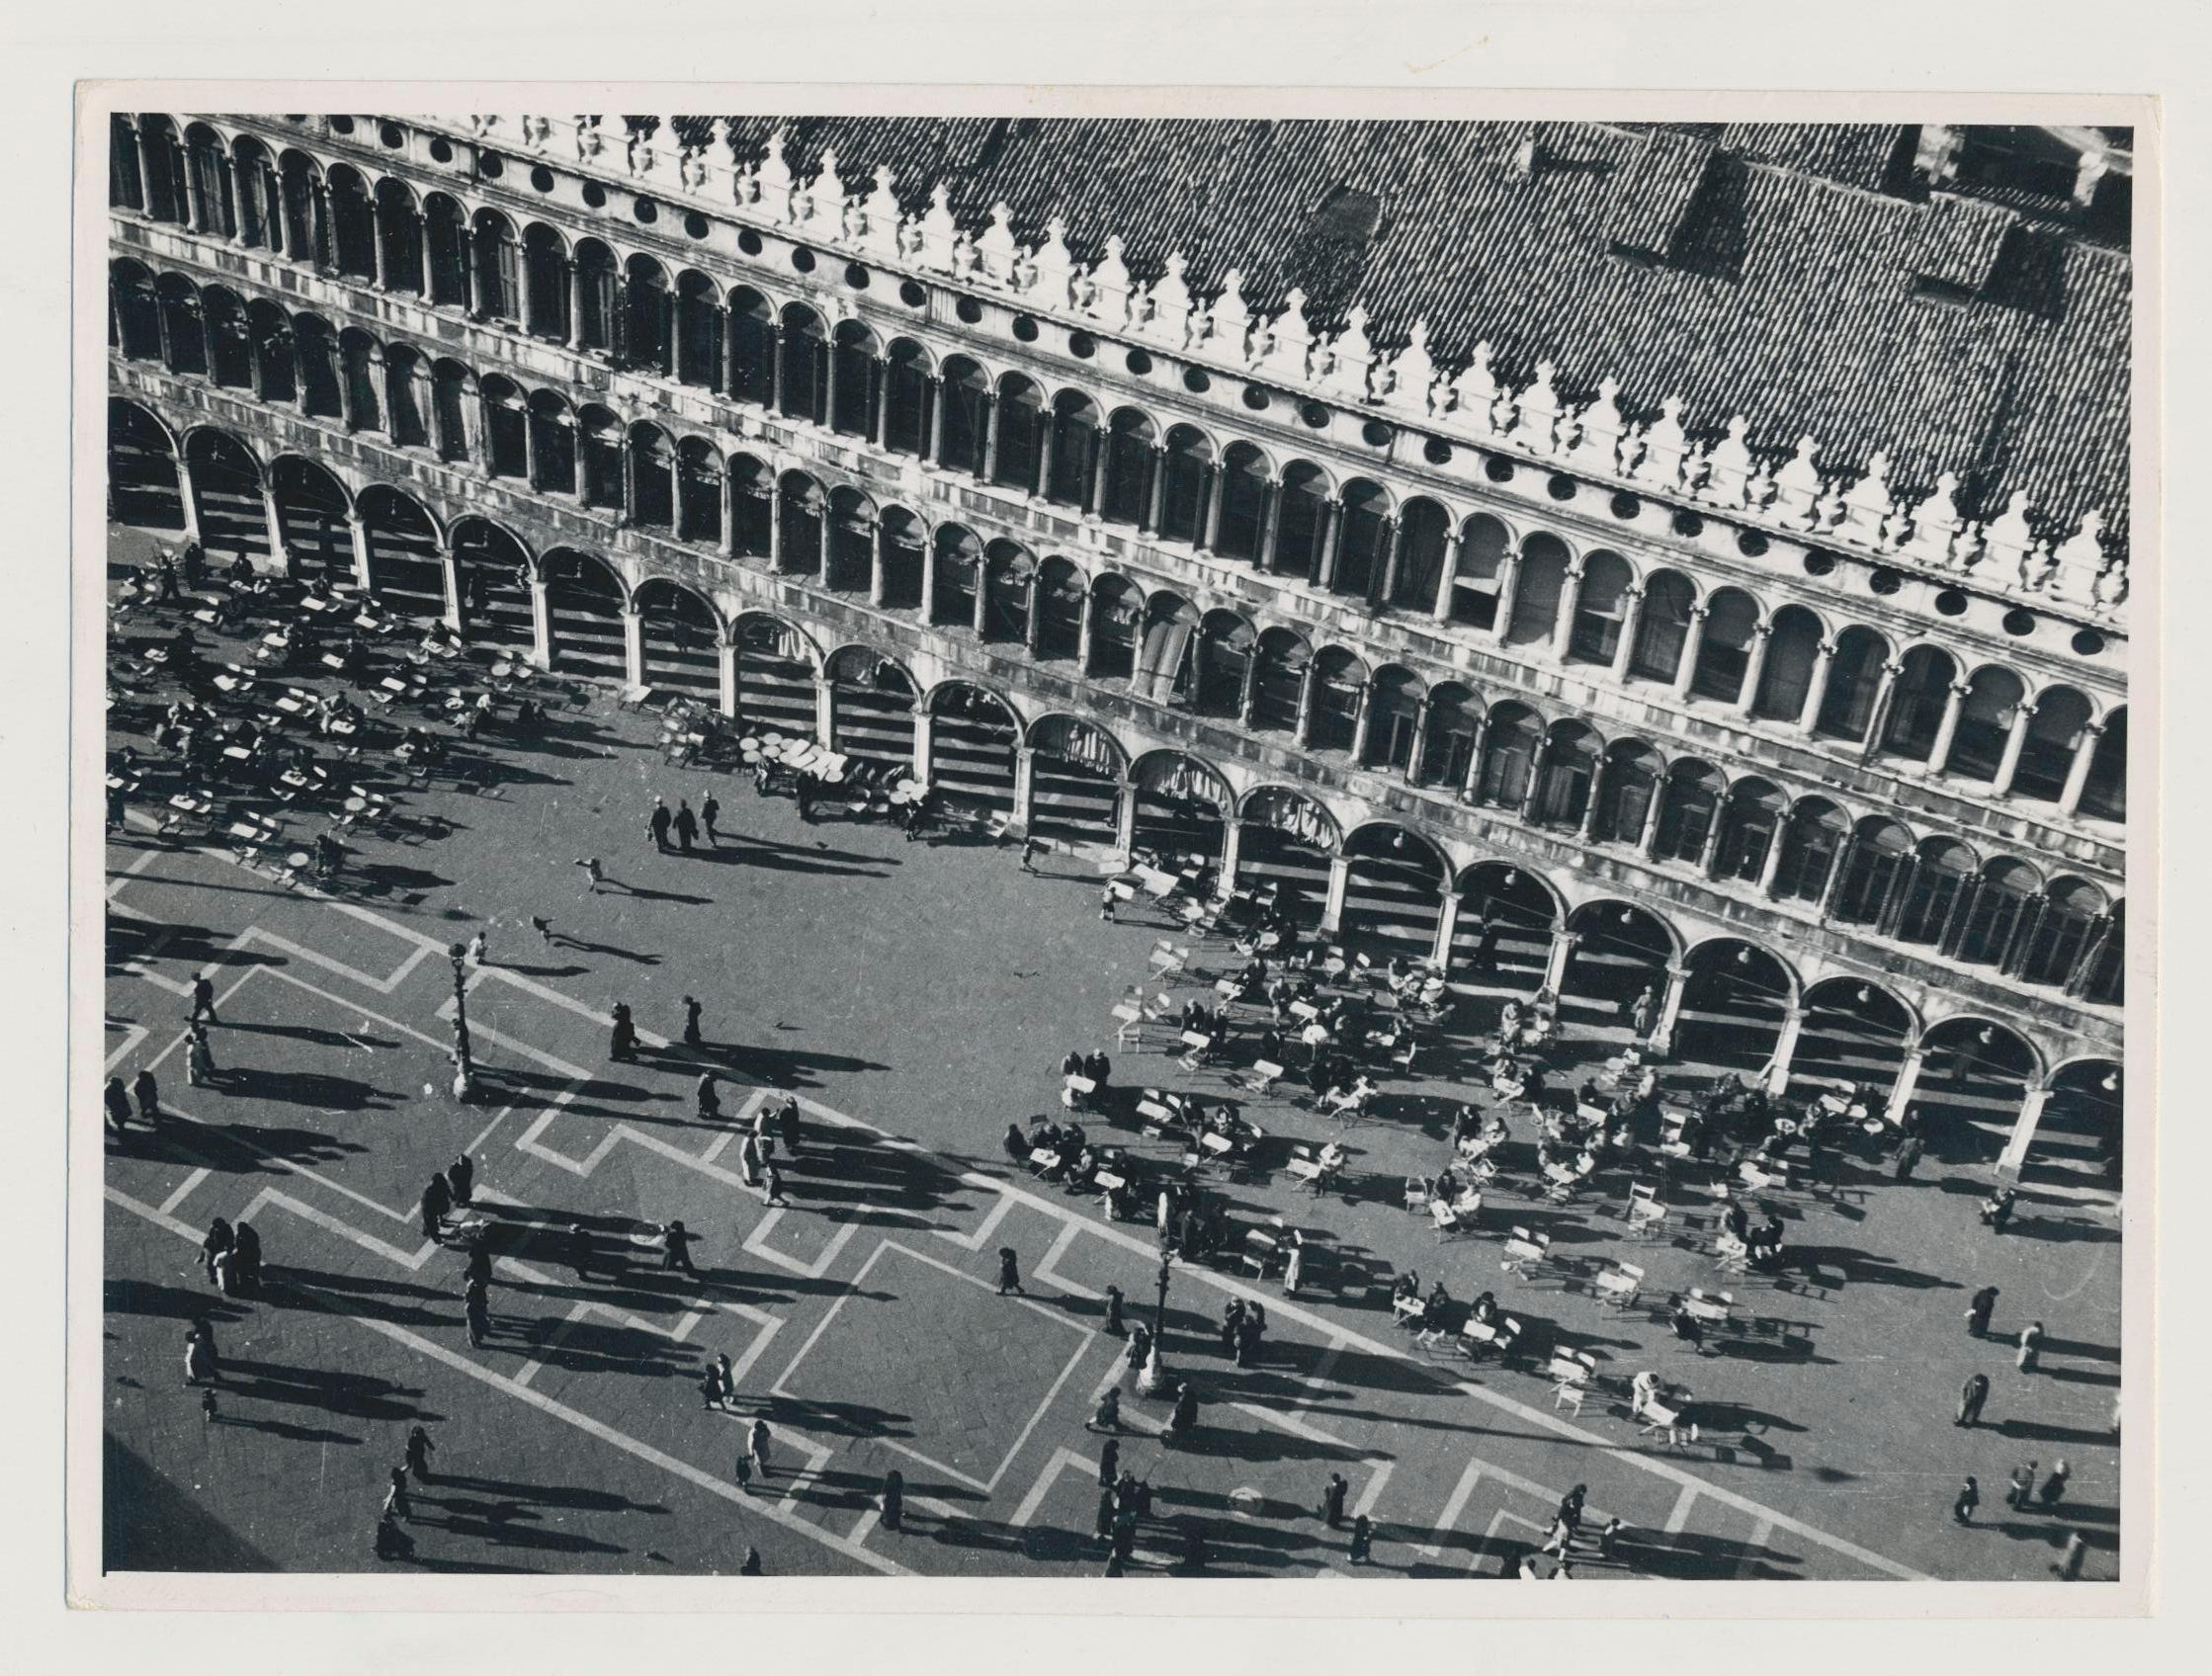 Erich Andres Black and White Photograph - Venice - Crowded Marksquare, Italy, 1950s, 13 x 17, 8 cm